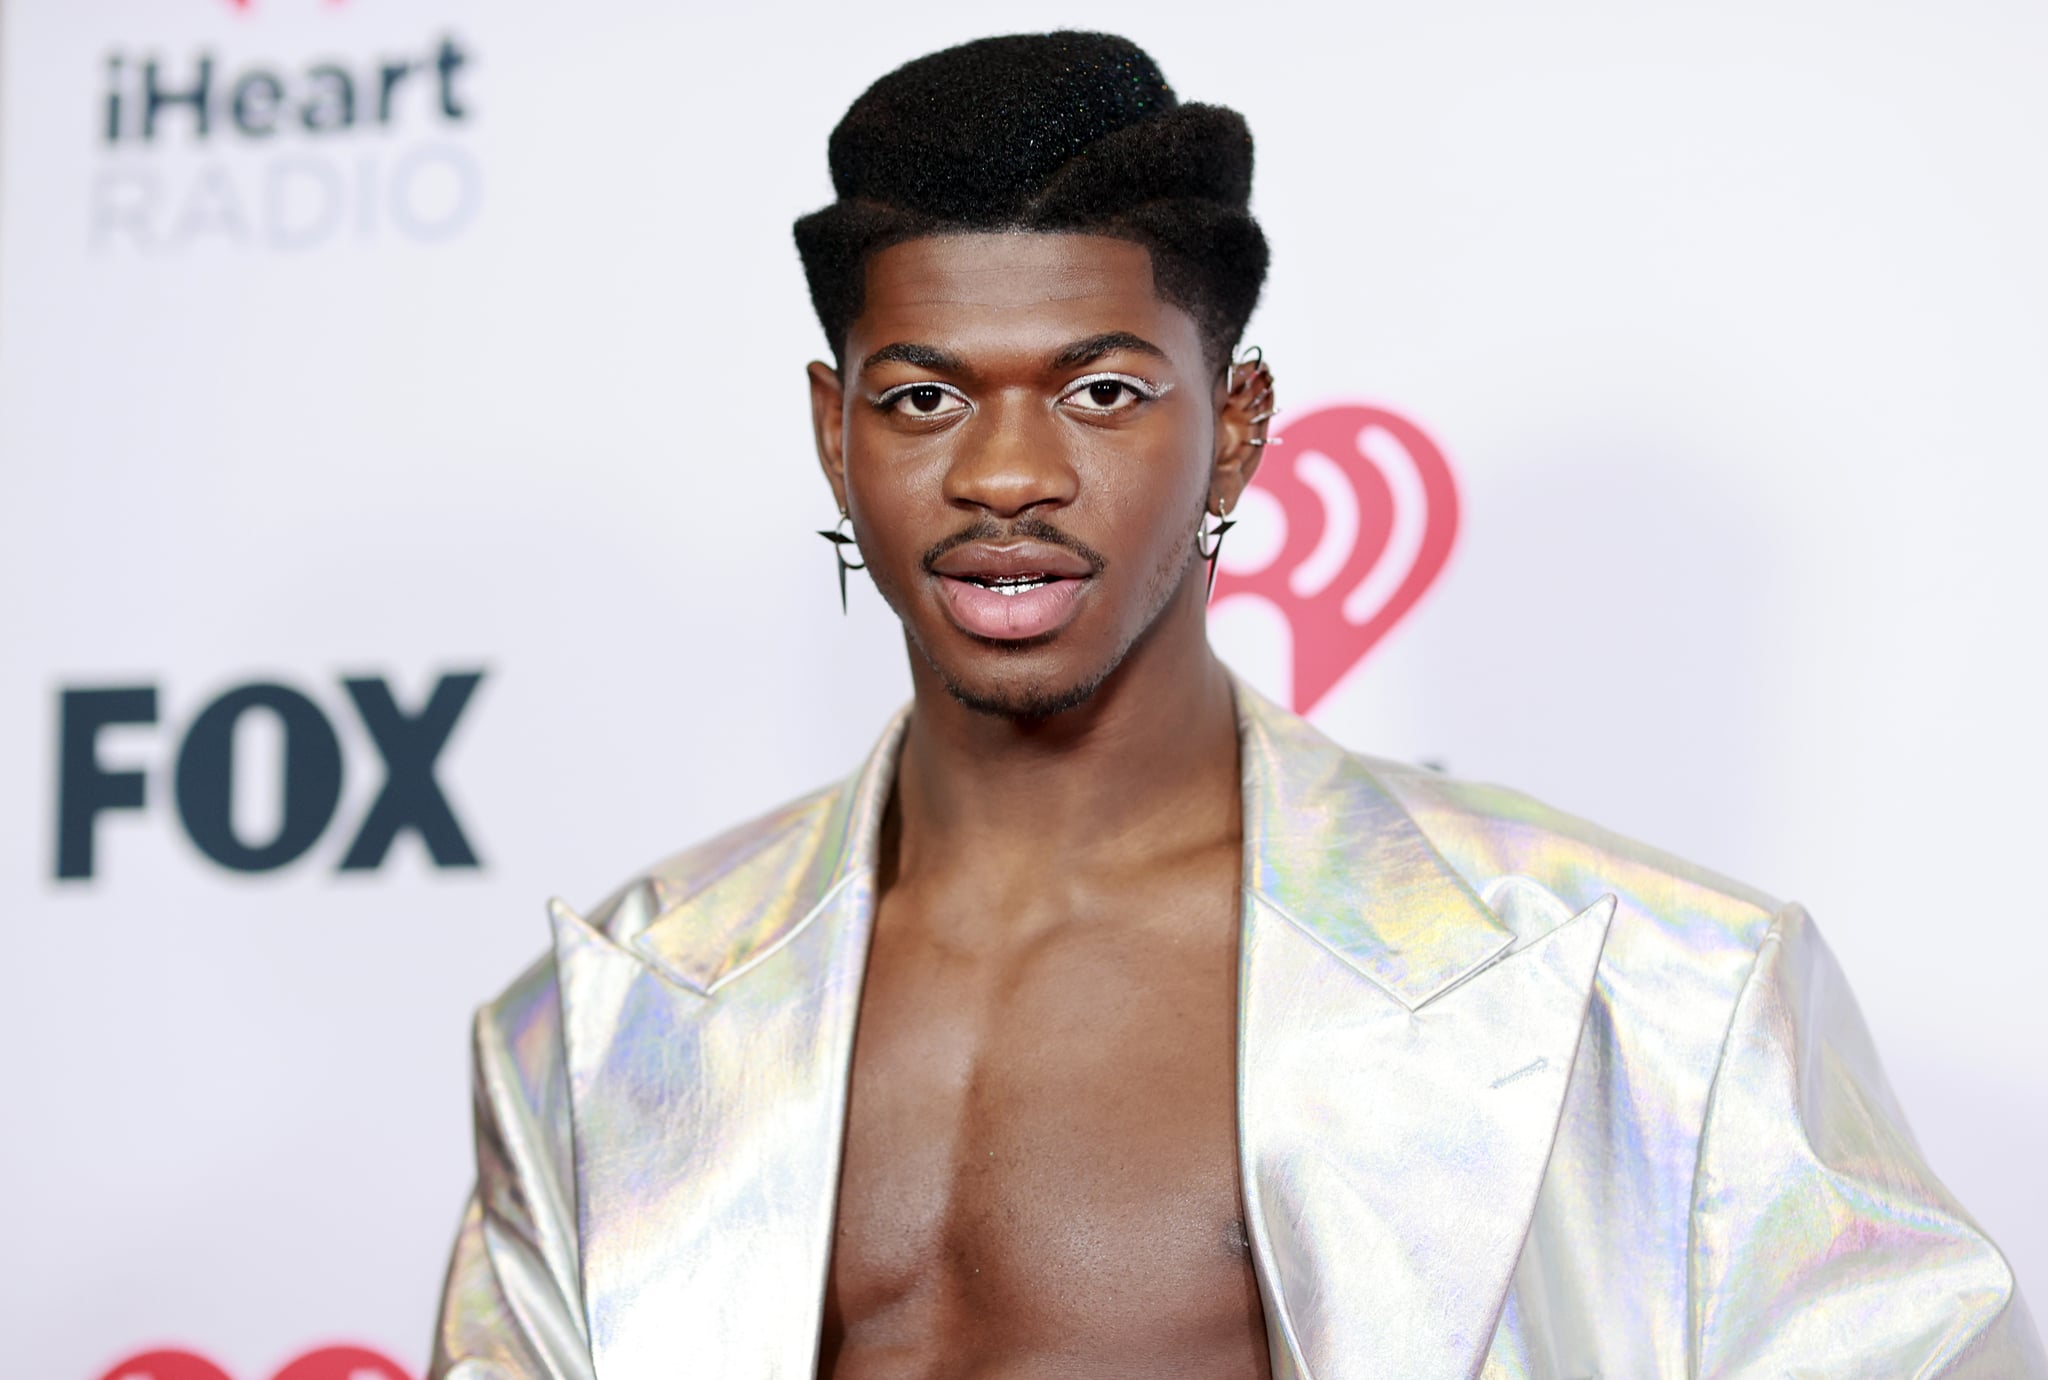 LOS ANGELES, CALIFORNIA - MAY 27: (EDITORIAL USE ONLY) Lil Nas X attends the 2021 iHeartRadio Music Awards at The Dolby Theatre in Los Angeles, California, which was broadcast live on FOX on May 27, 2021. (Photo by Emma McIntyre/Getty Images for iHeartMedia)